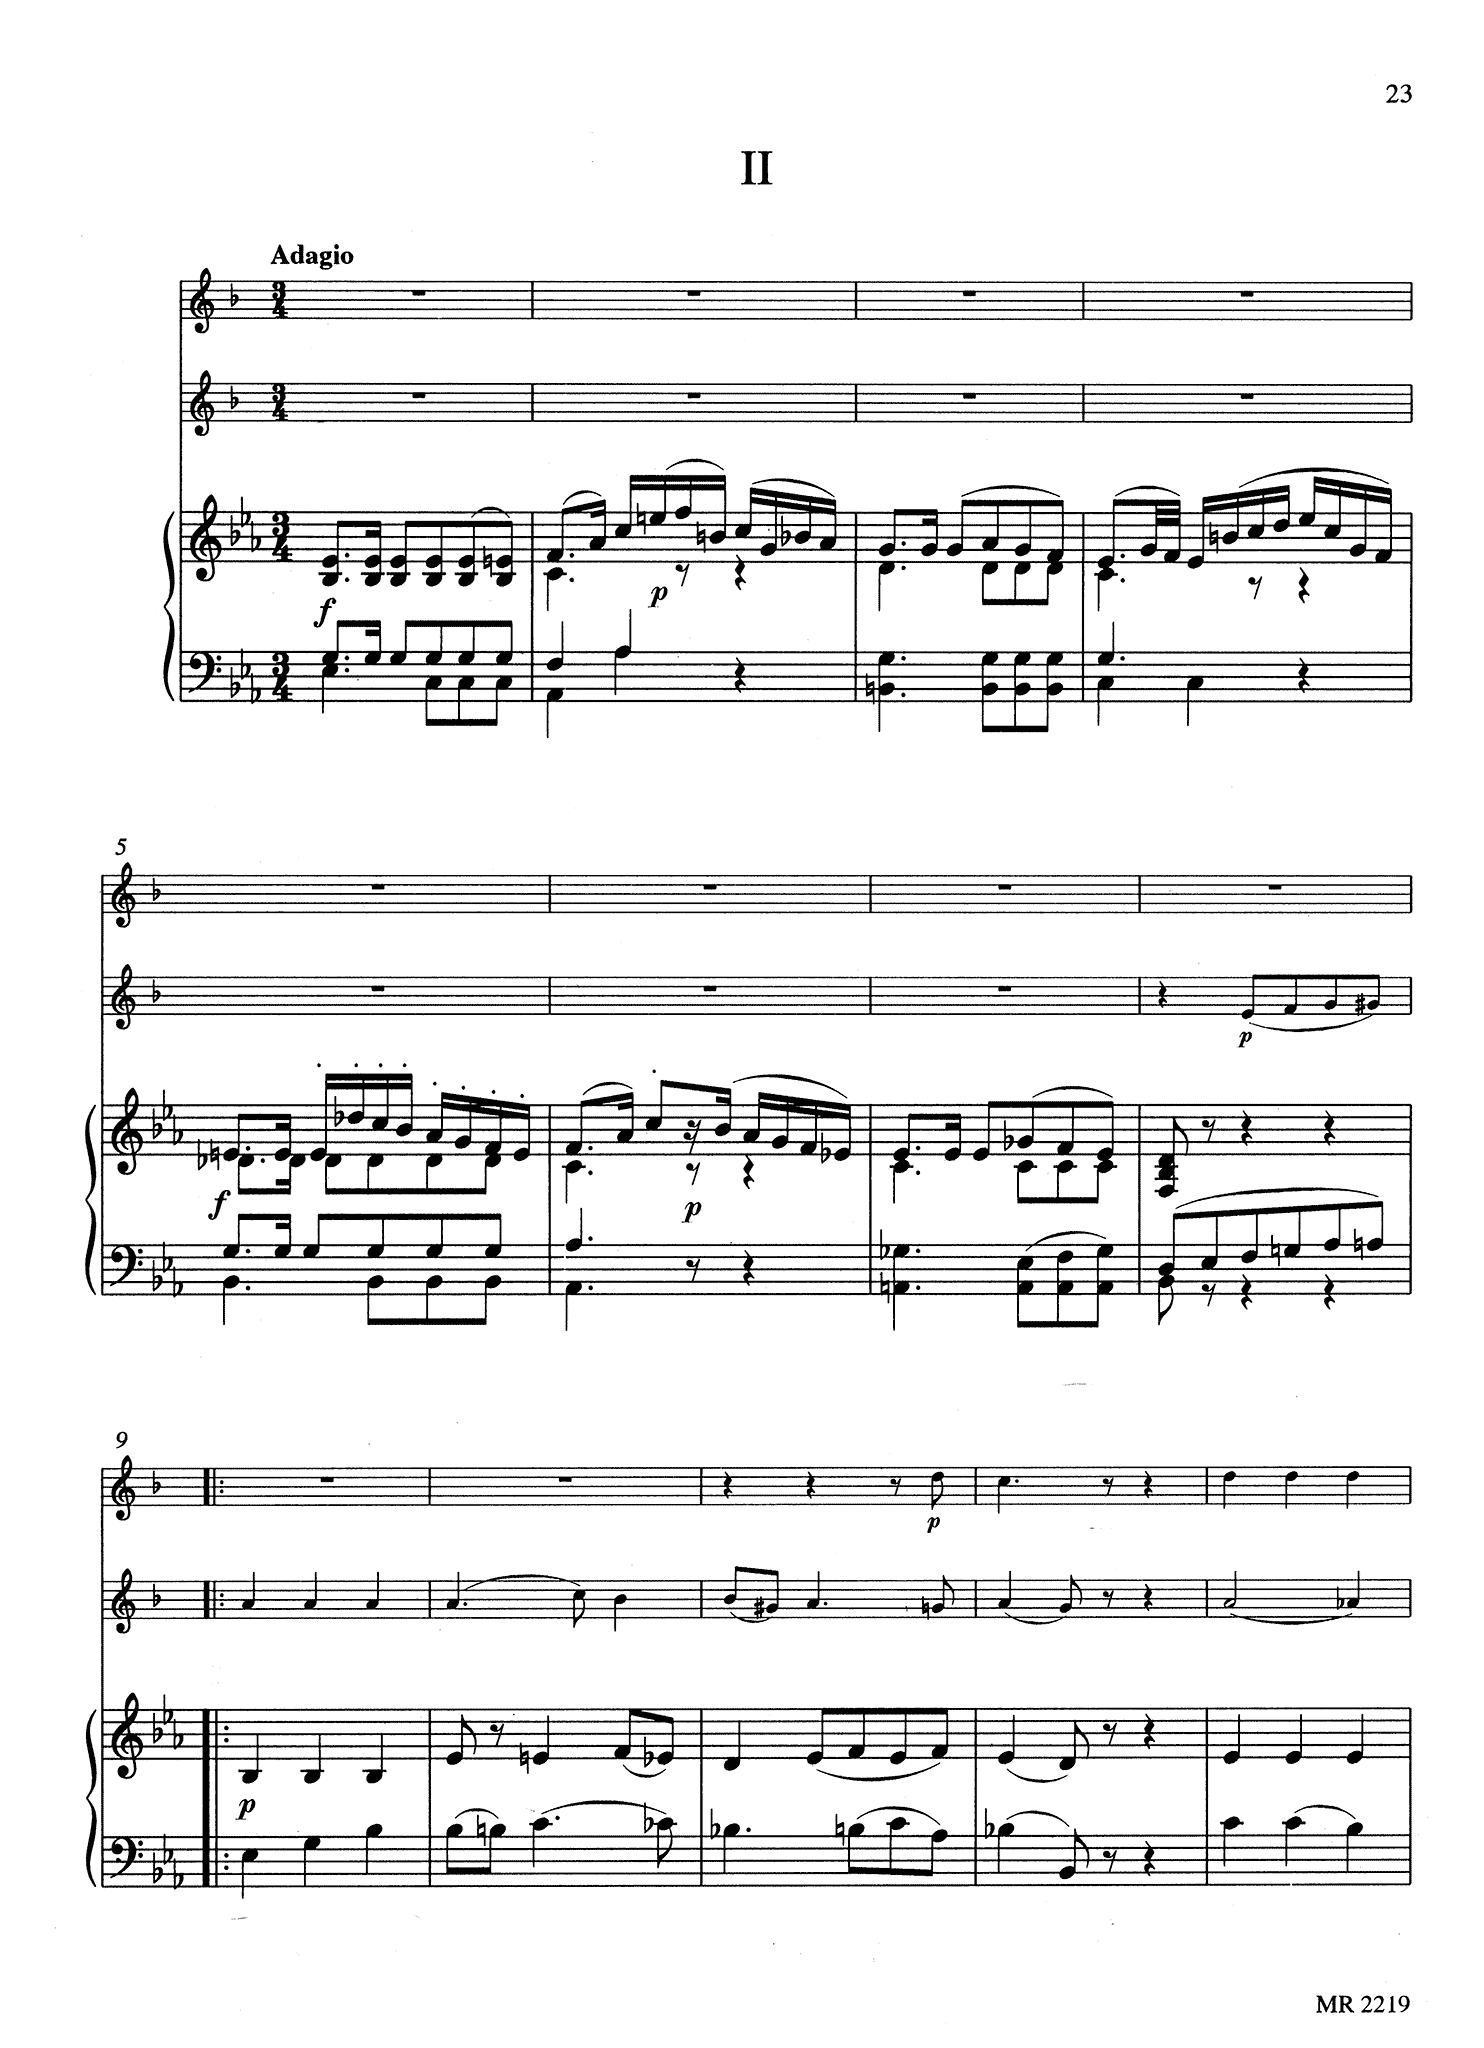 Franz Tausch Concertante No. 2, Op. 26 2 clarinets & orchestra piano reduction - Movement 2